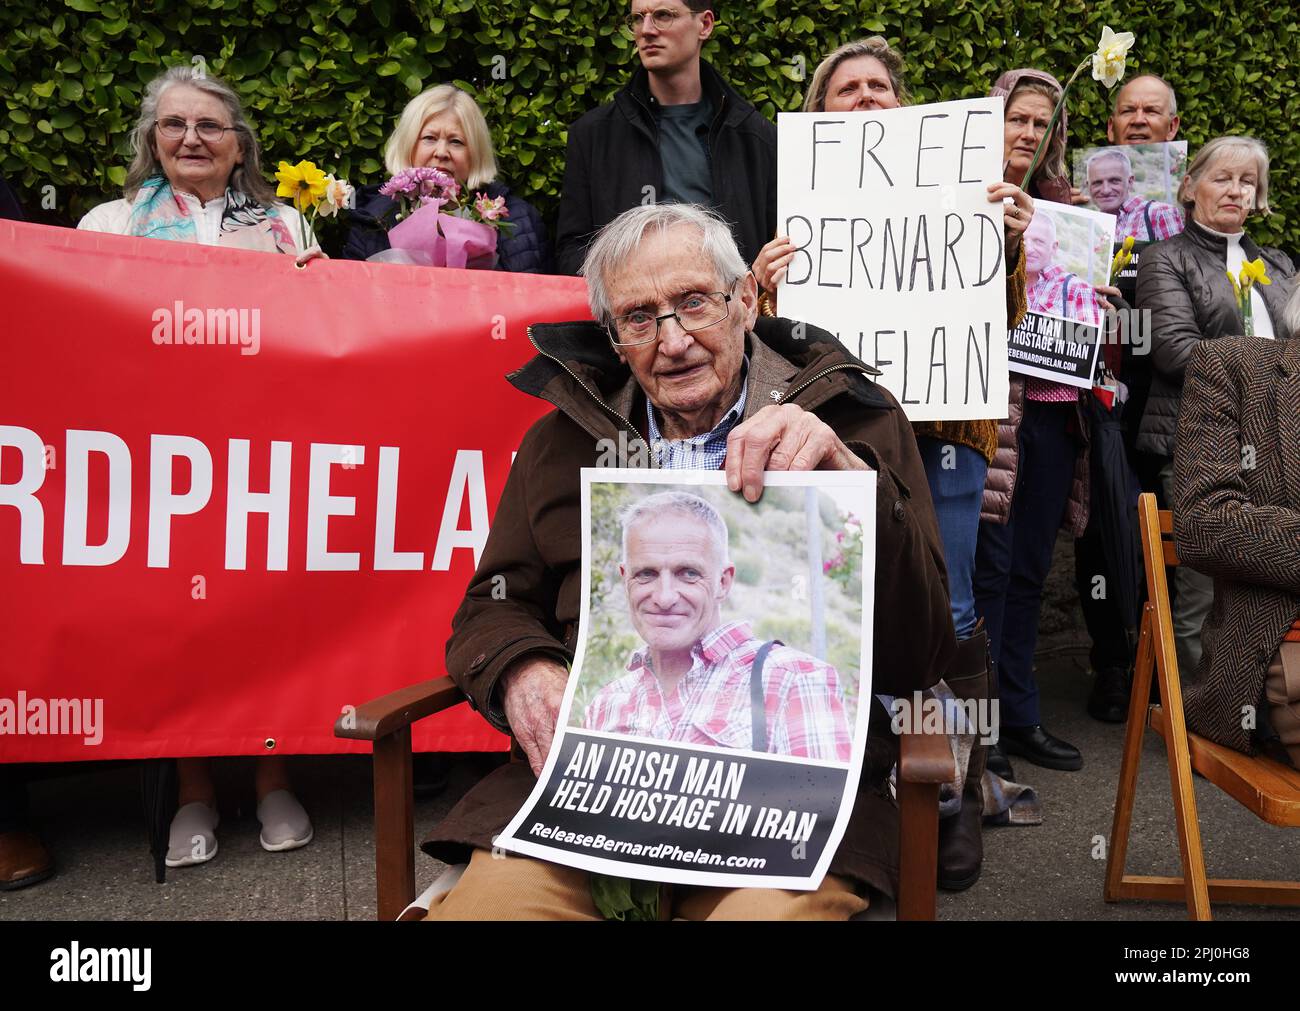 Bernard Phelan’s father Vincent Phelan with friends, family and supporters at a vigil outside the Iranian Embassy in Dublin. Bernard Phelan was detained in Iran last year and is in need of medical care that is not being provided. Picture date: Wednesday August 25, 2021. Stock Photo